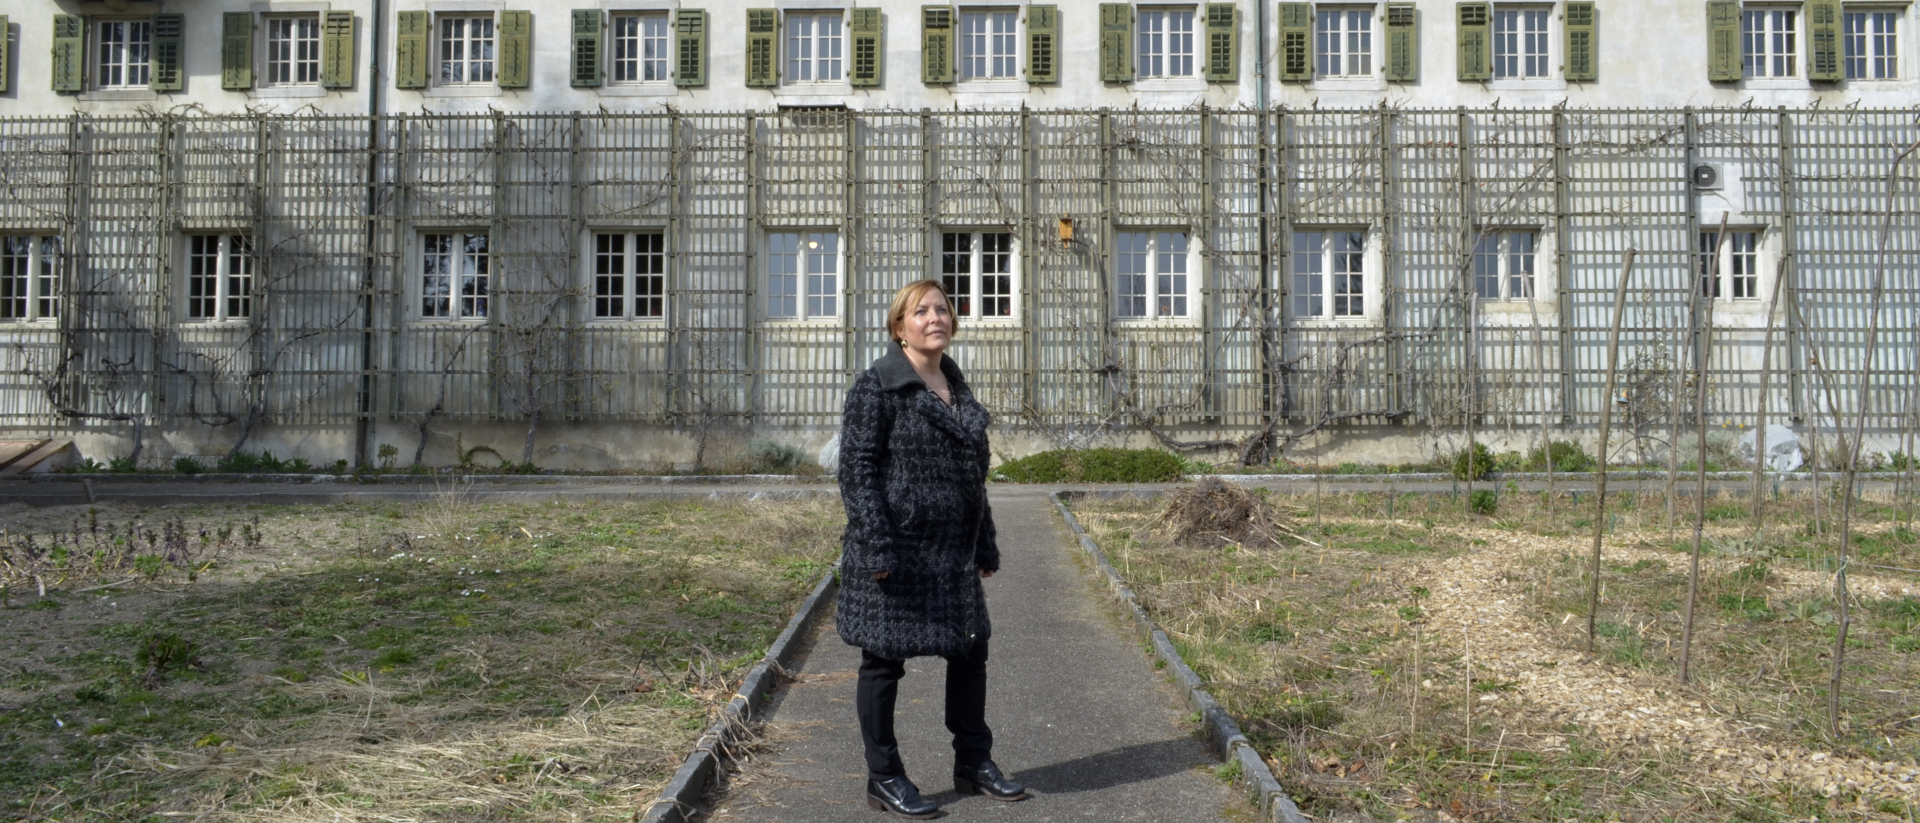 Claudia Fuhrer in front of the imposing former Capuchin monastery in Solothurn